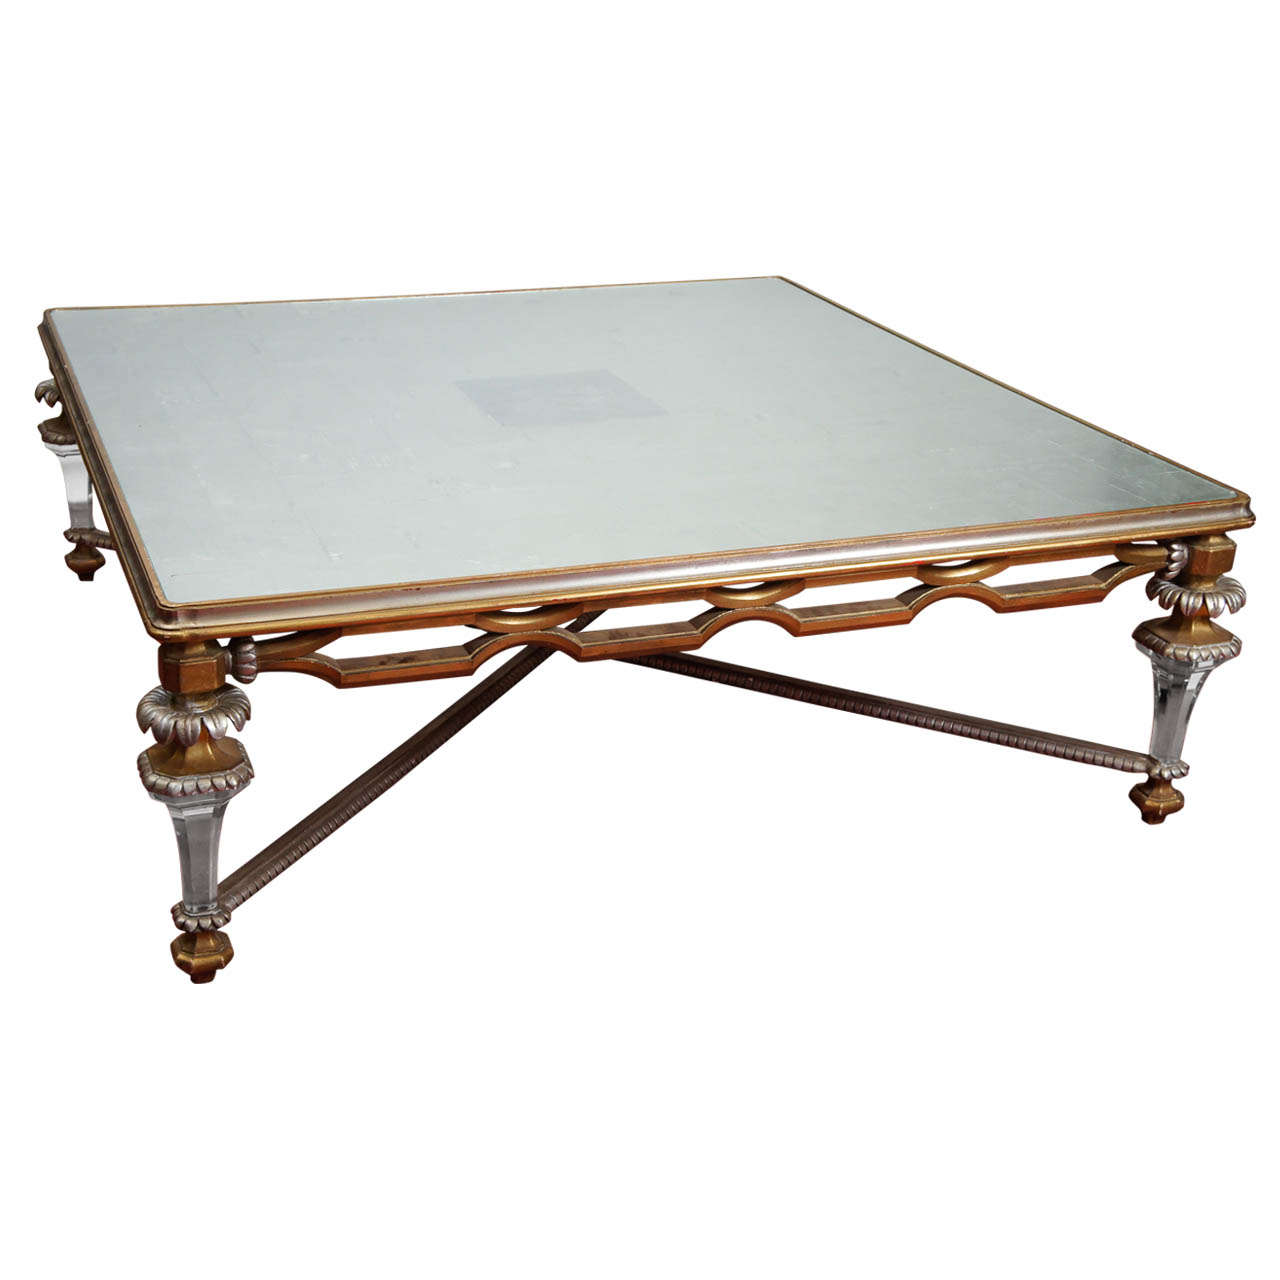 Neoclassical Revival Style Coffee Table